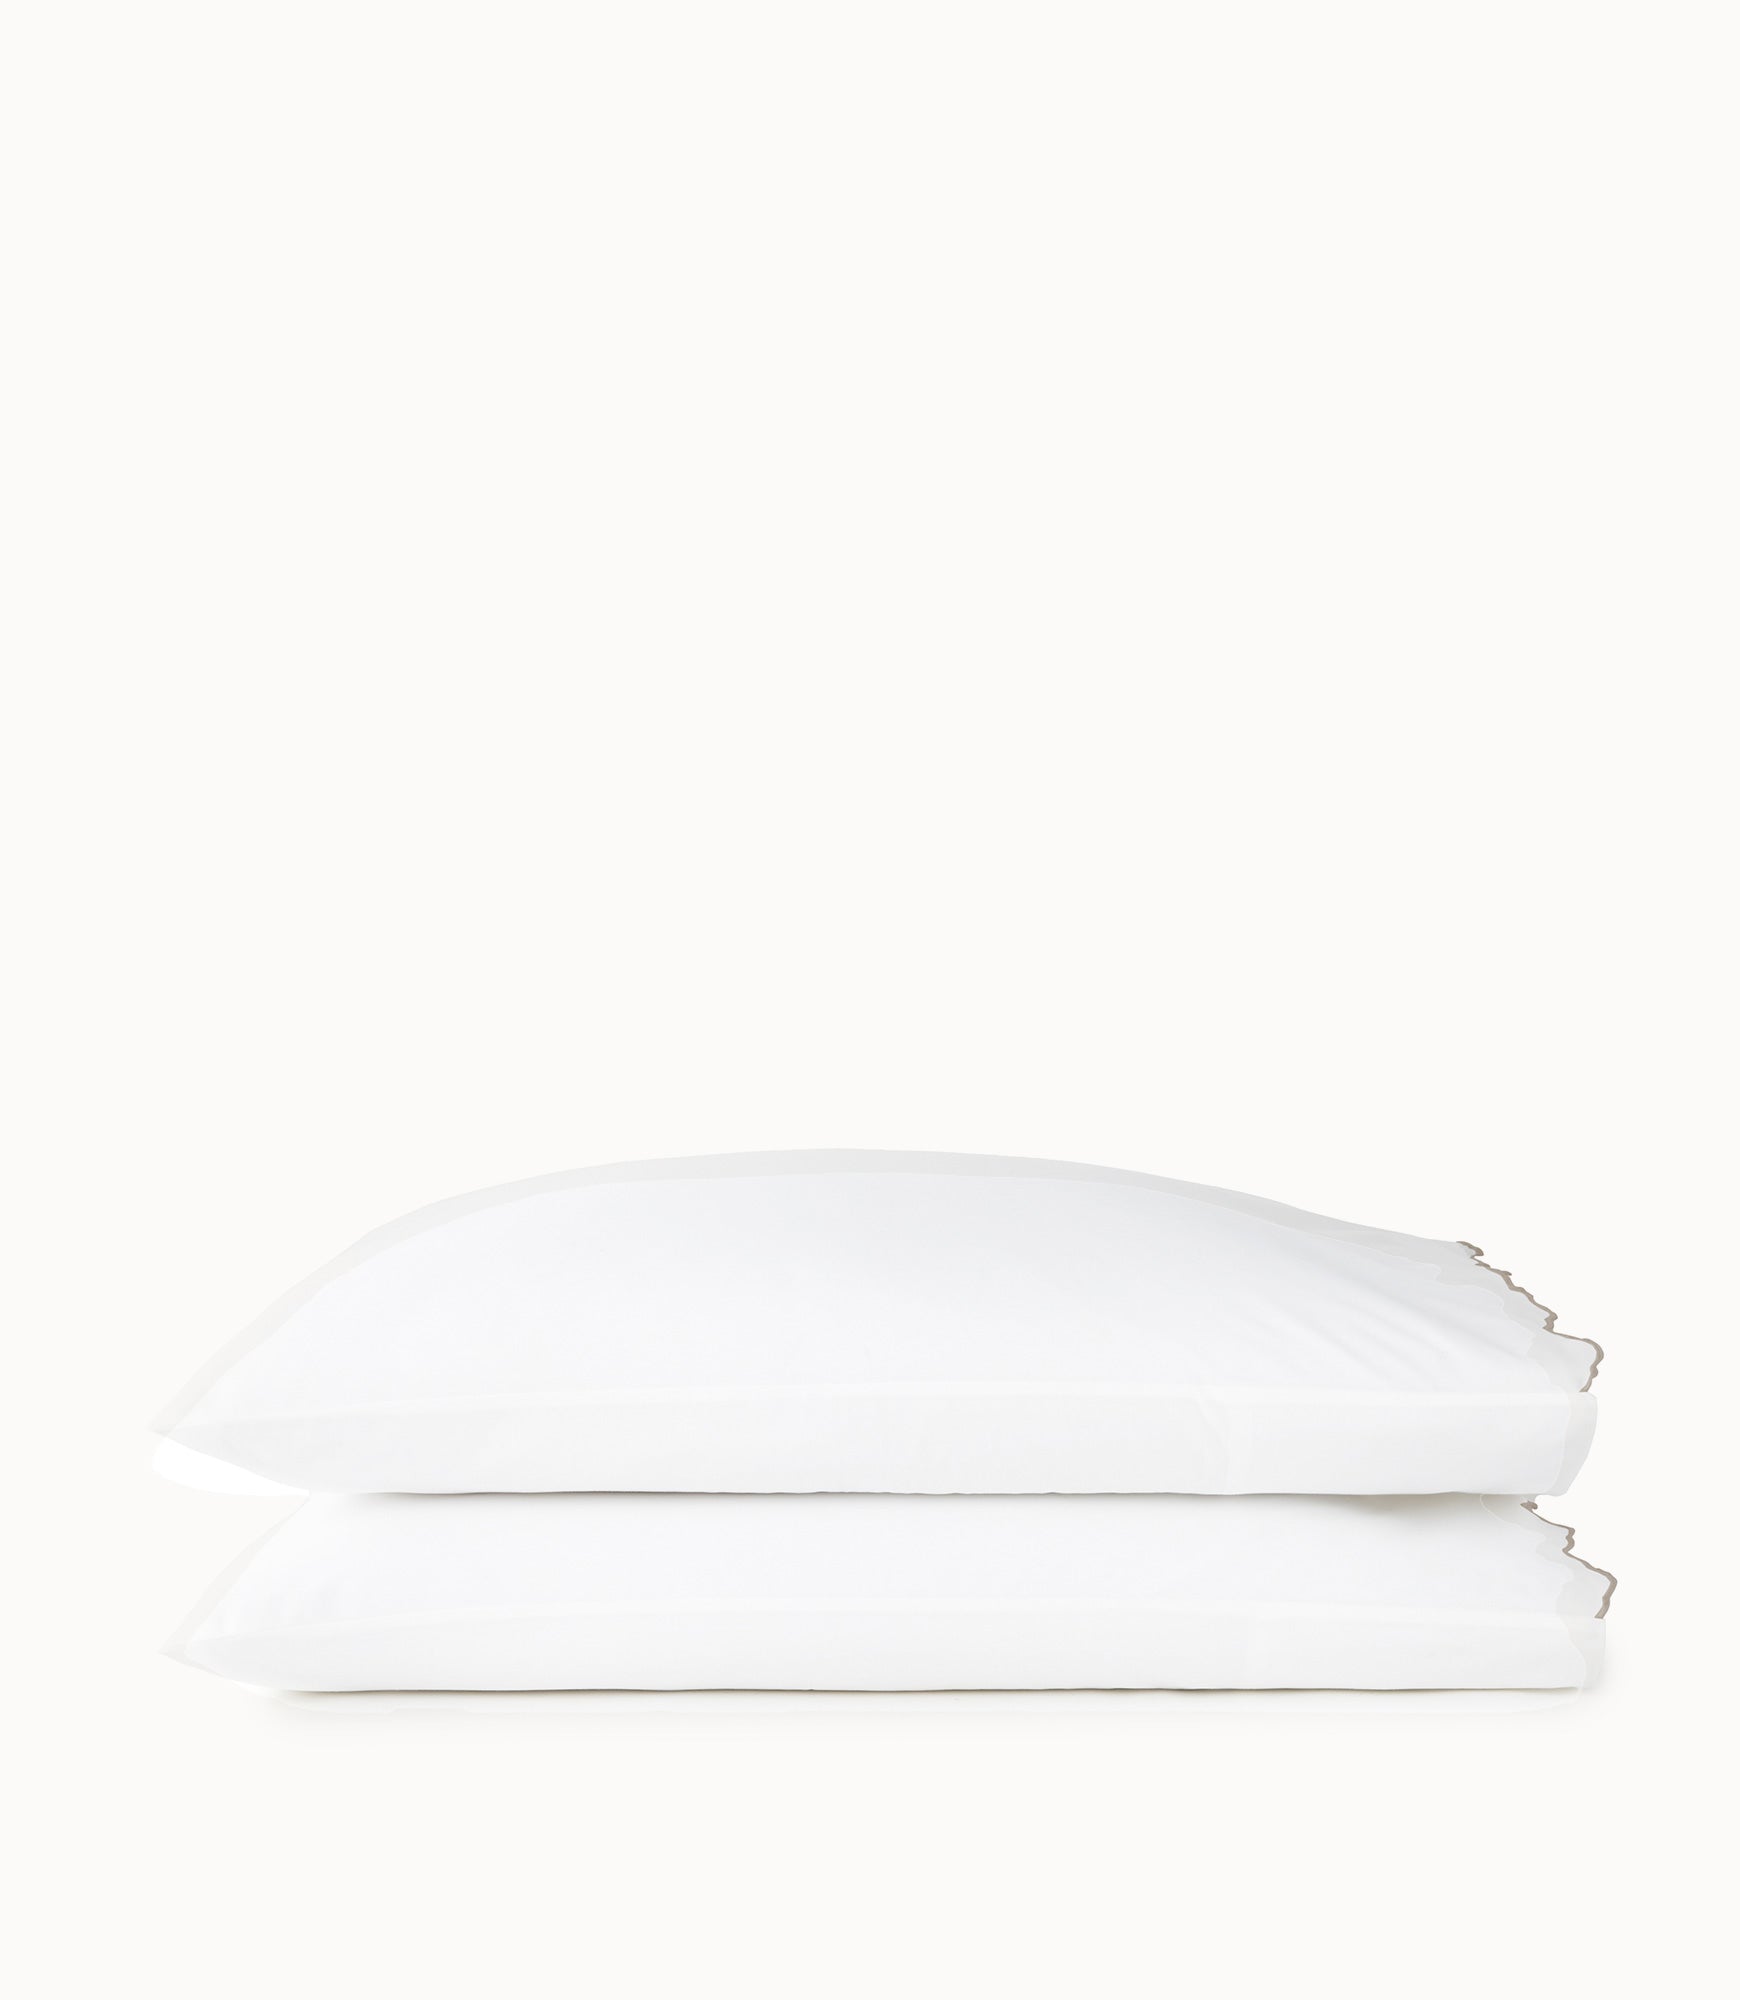 Urban Scallop Pillow Cases stacked Taupe